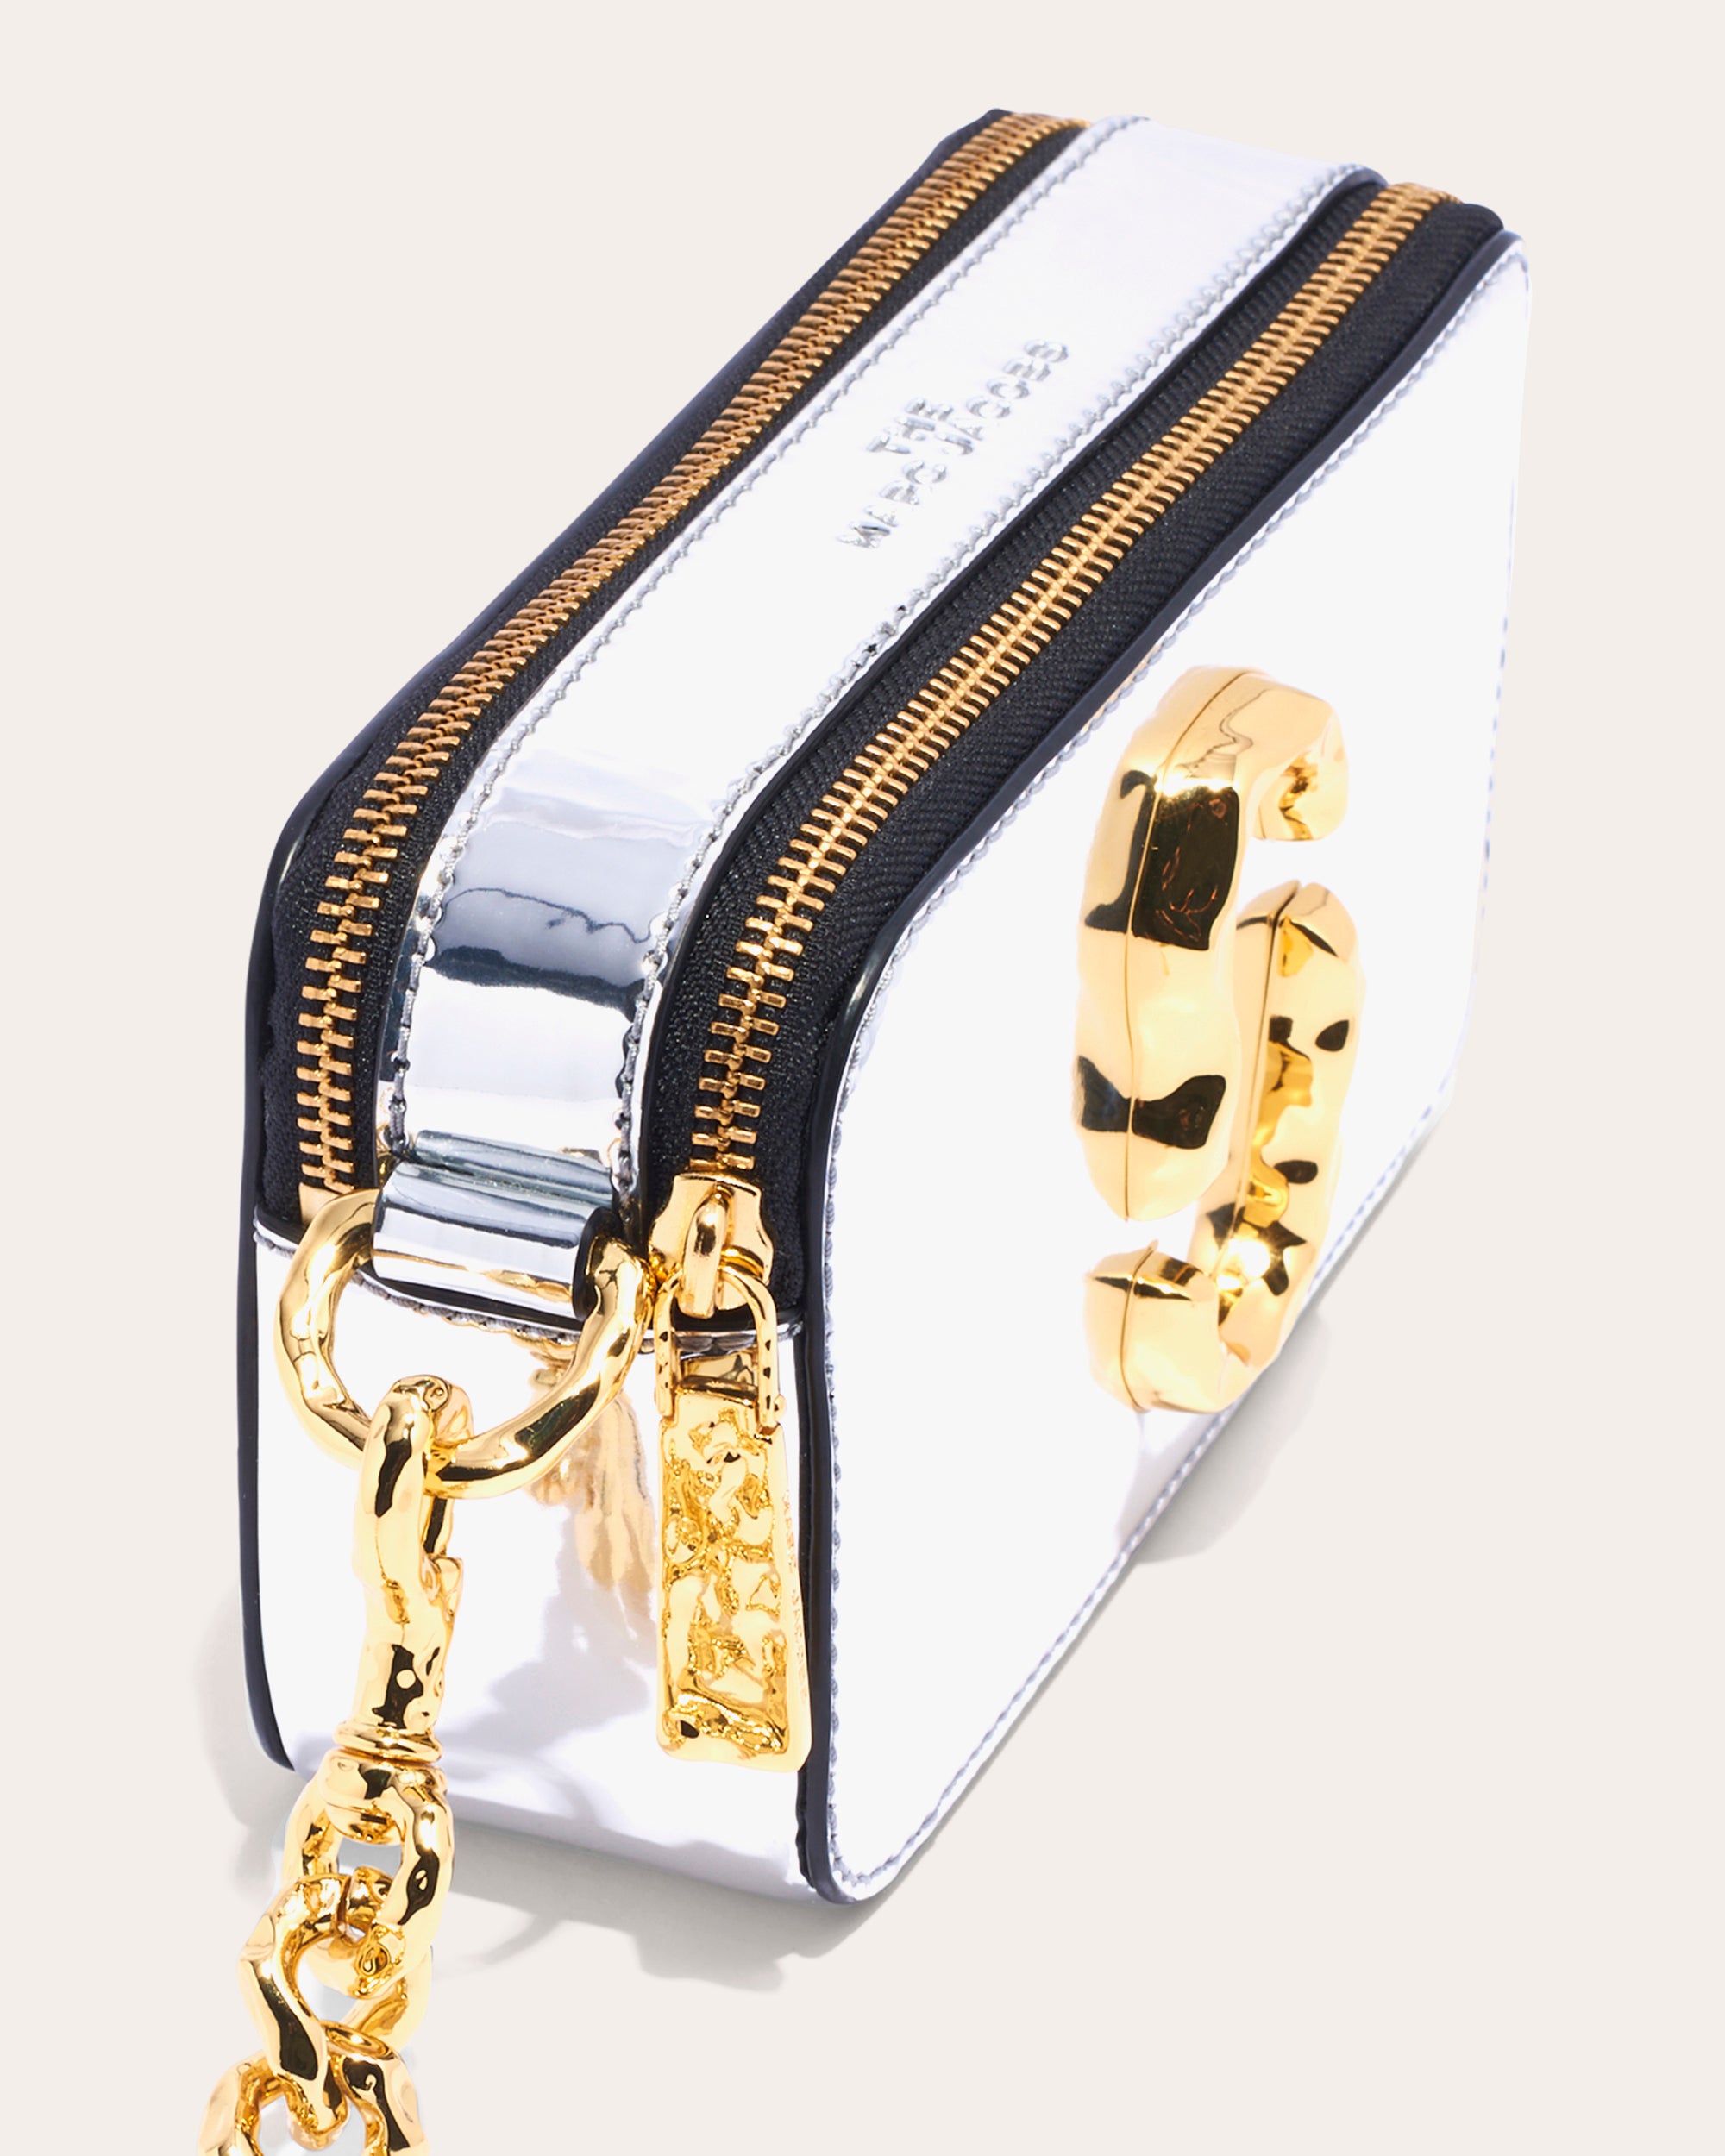 Olivela - SPOTTED: @marcjacobs's iconic snapshot camera bag on the